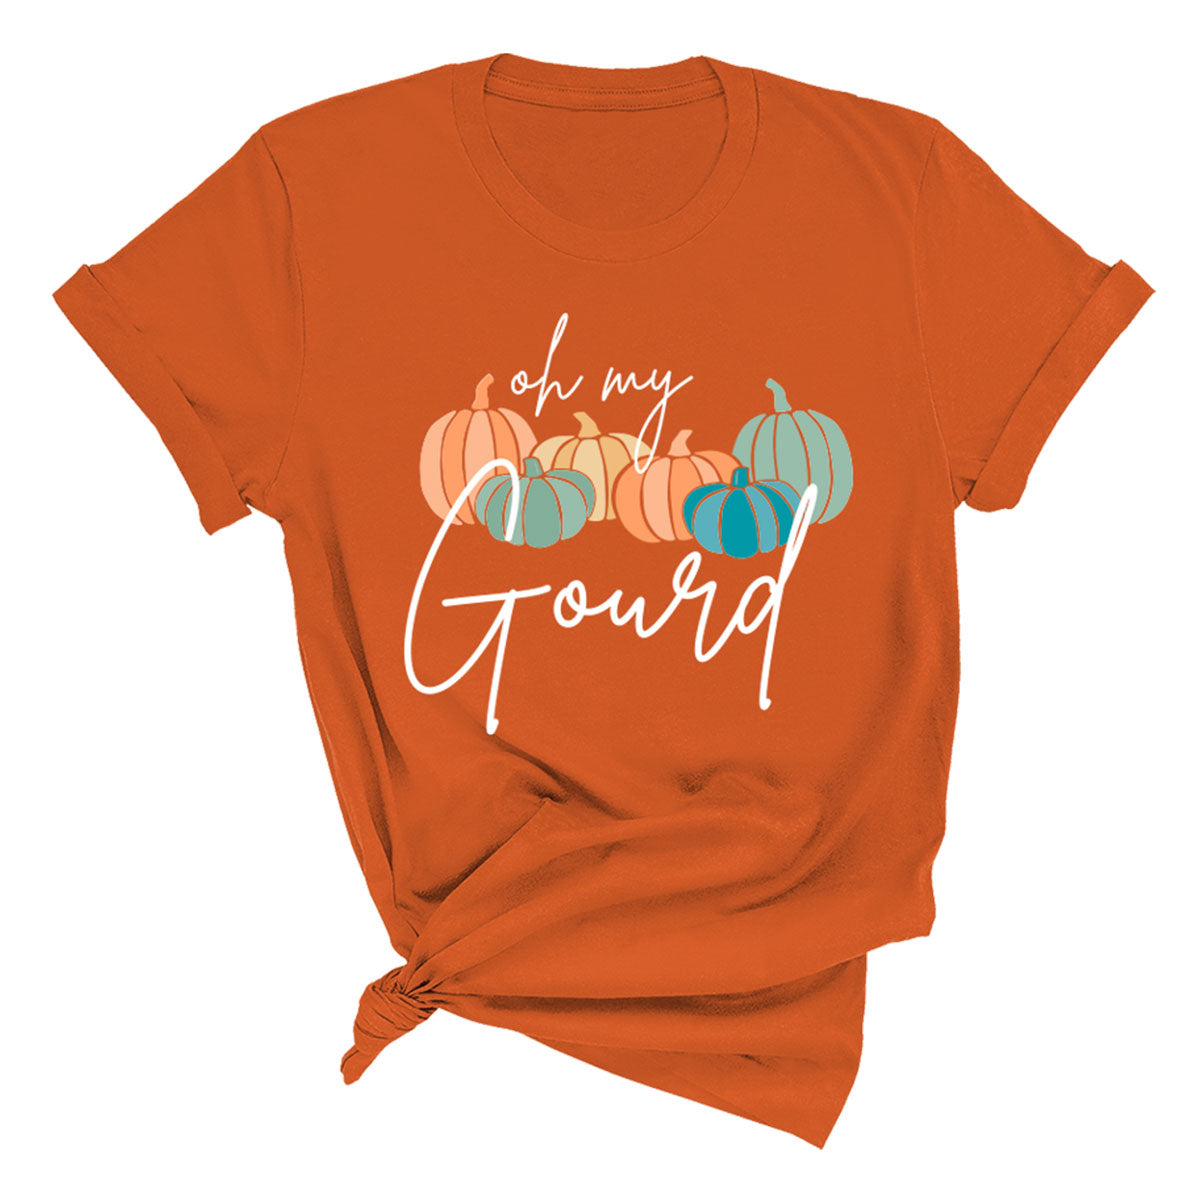 Oh my Gourd Graphic Tee